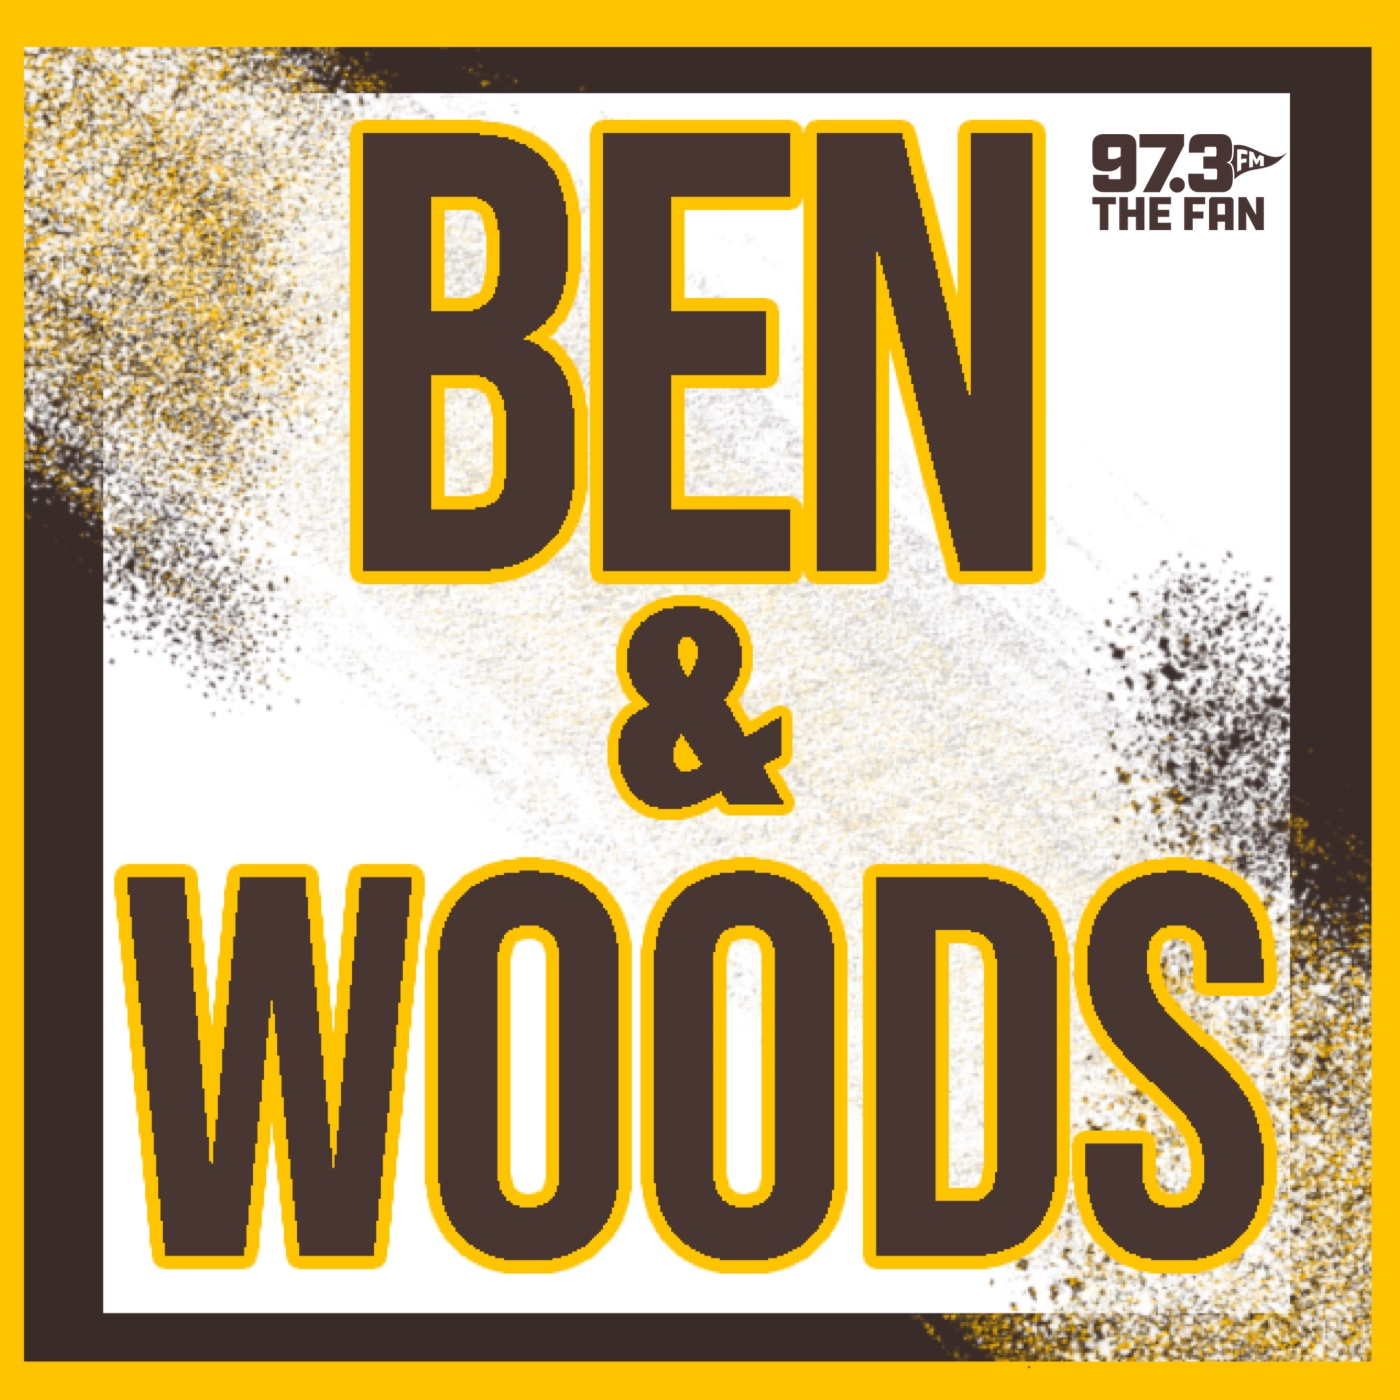 Dylan Cease Joined Ben & Woods!